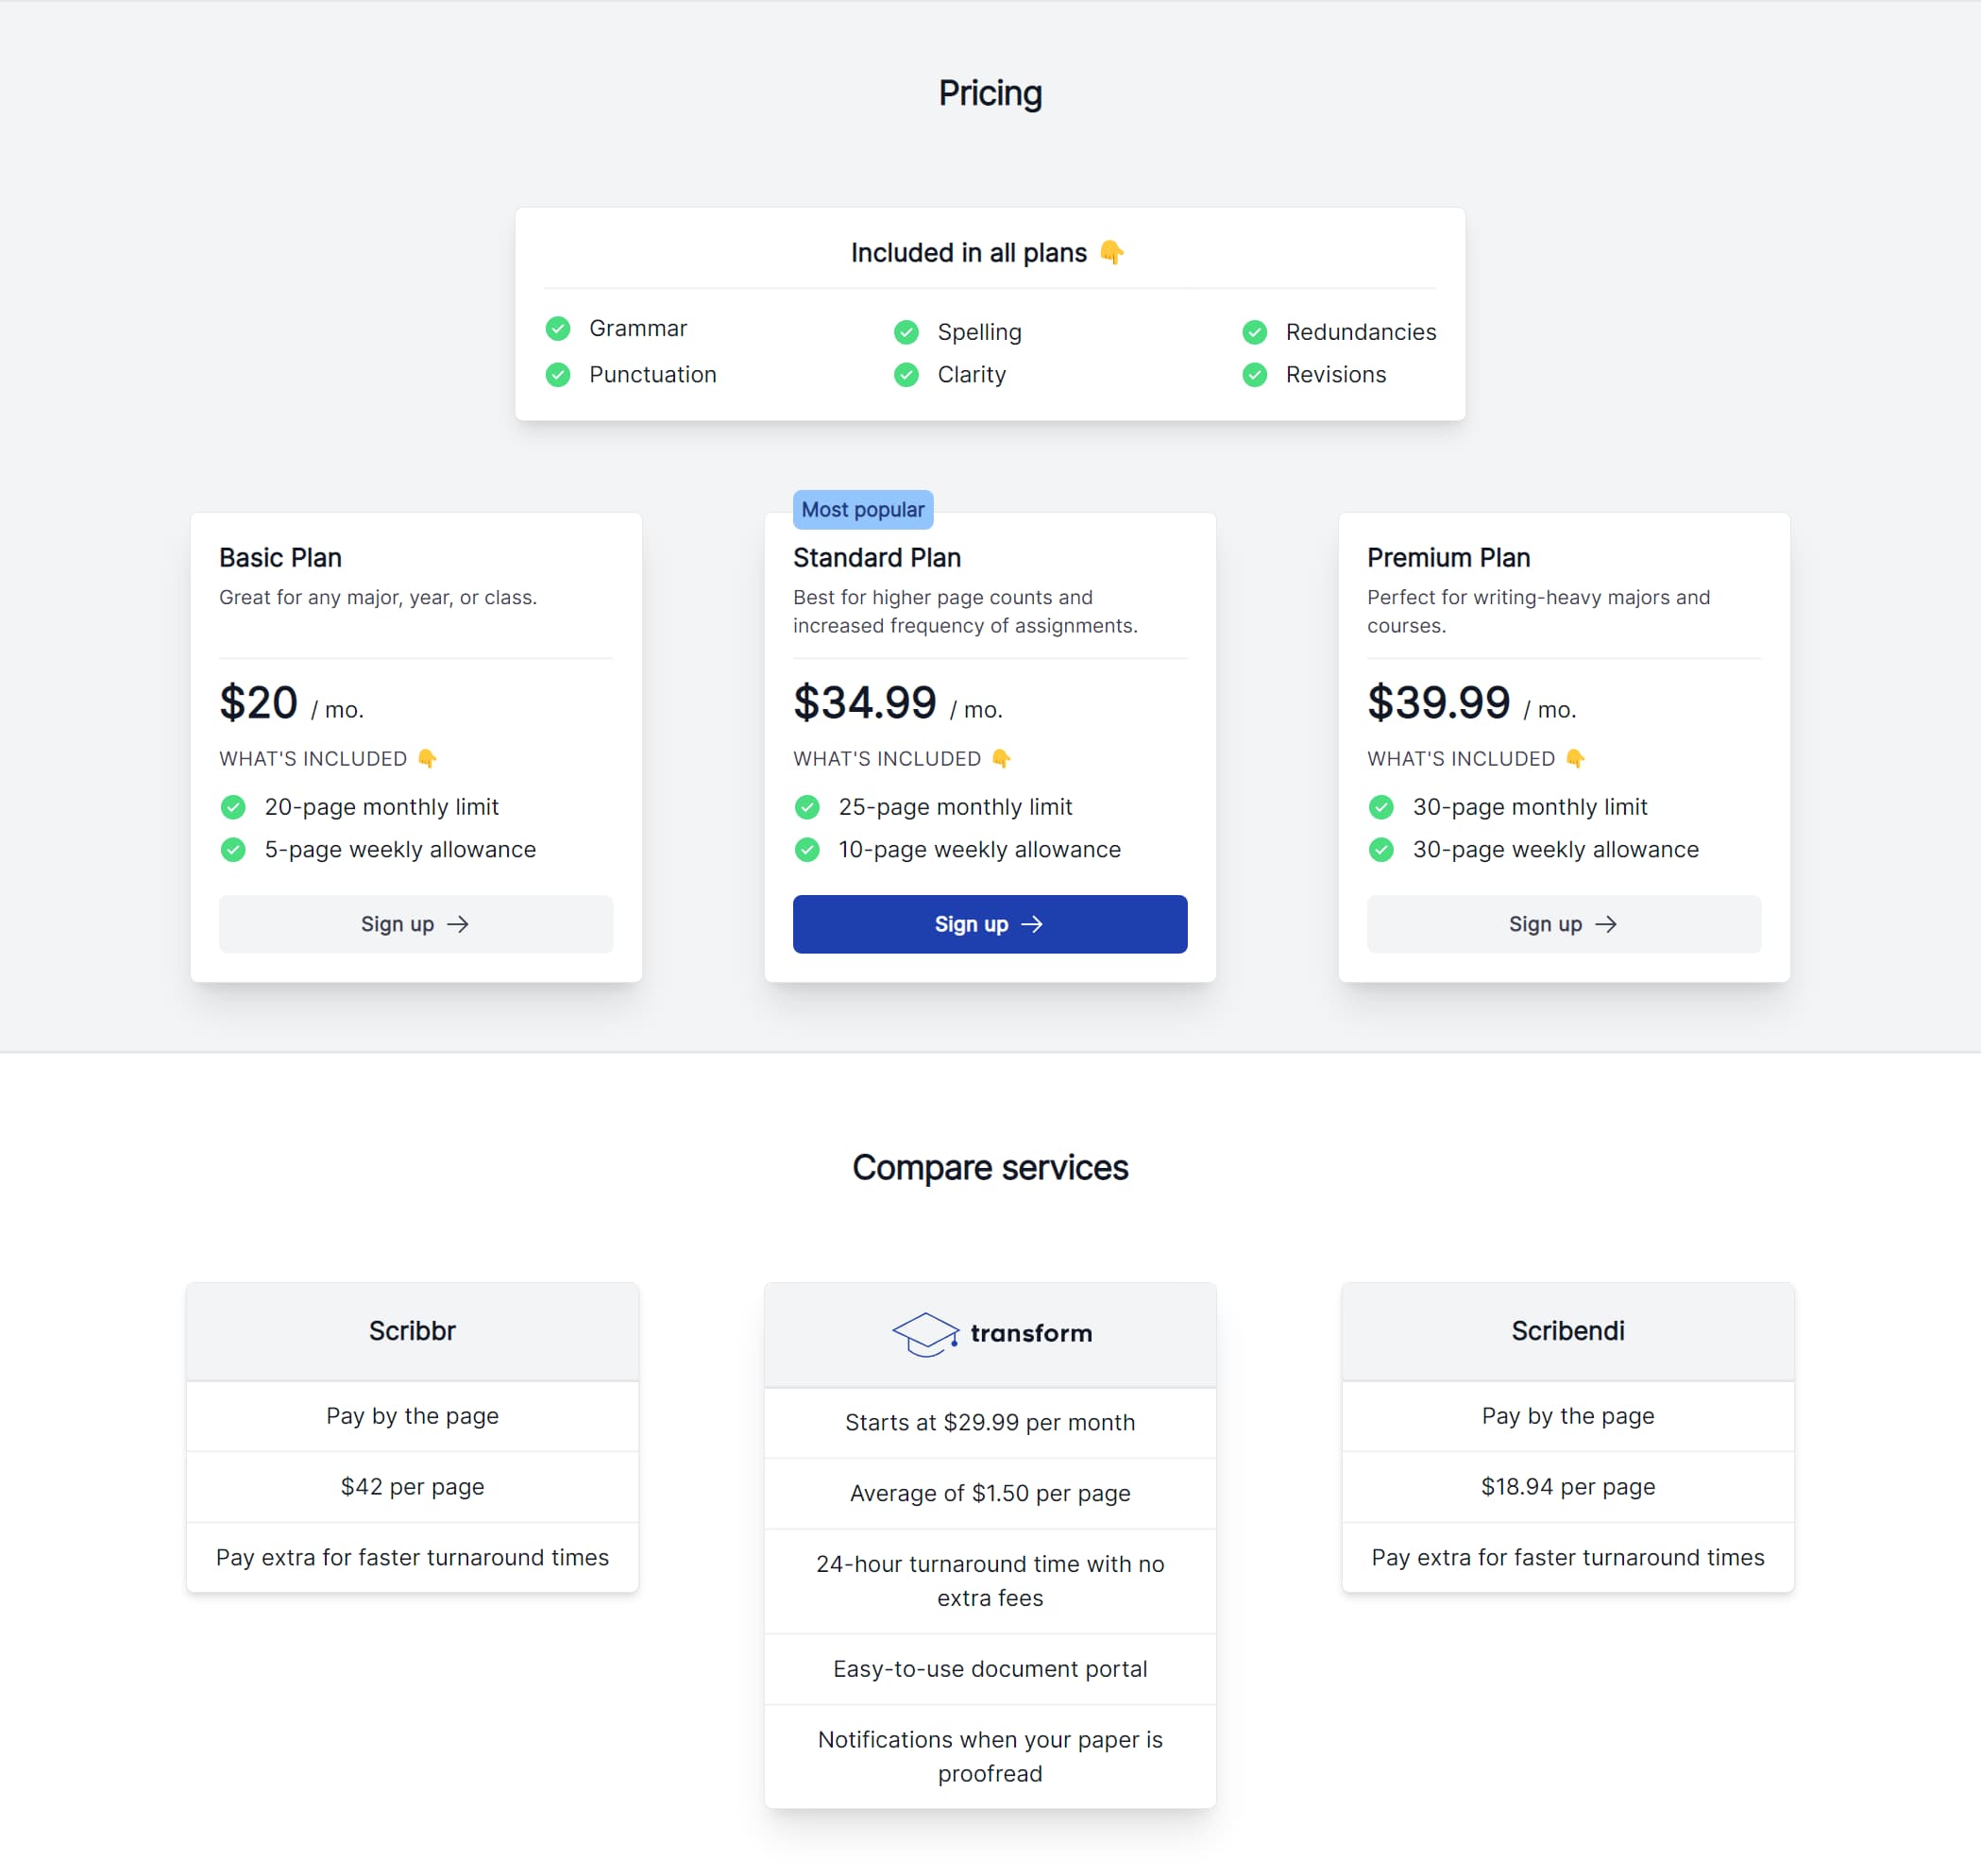 The home page's pricing section